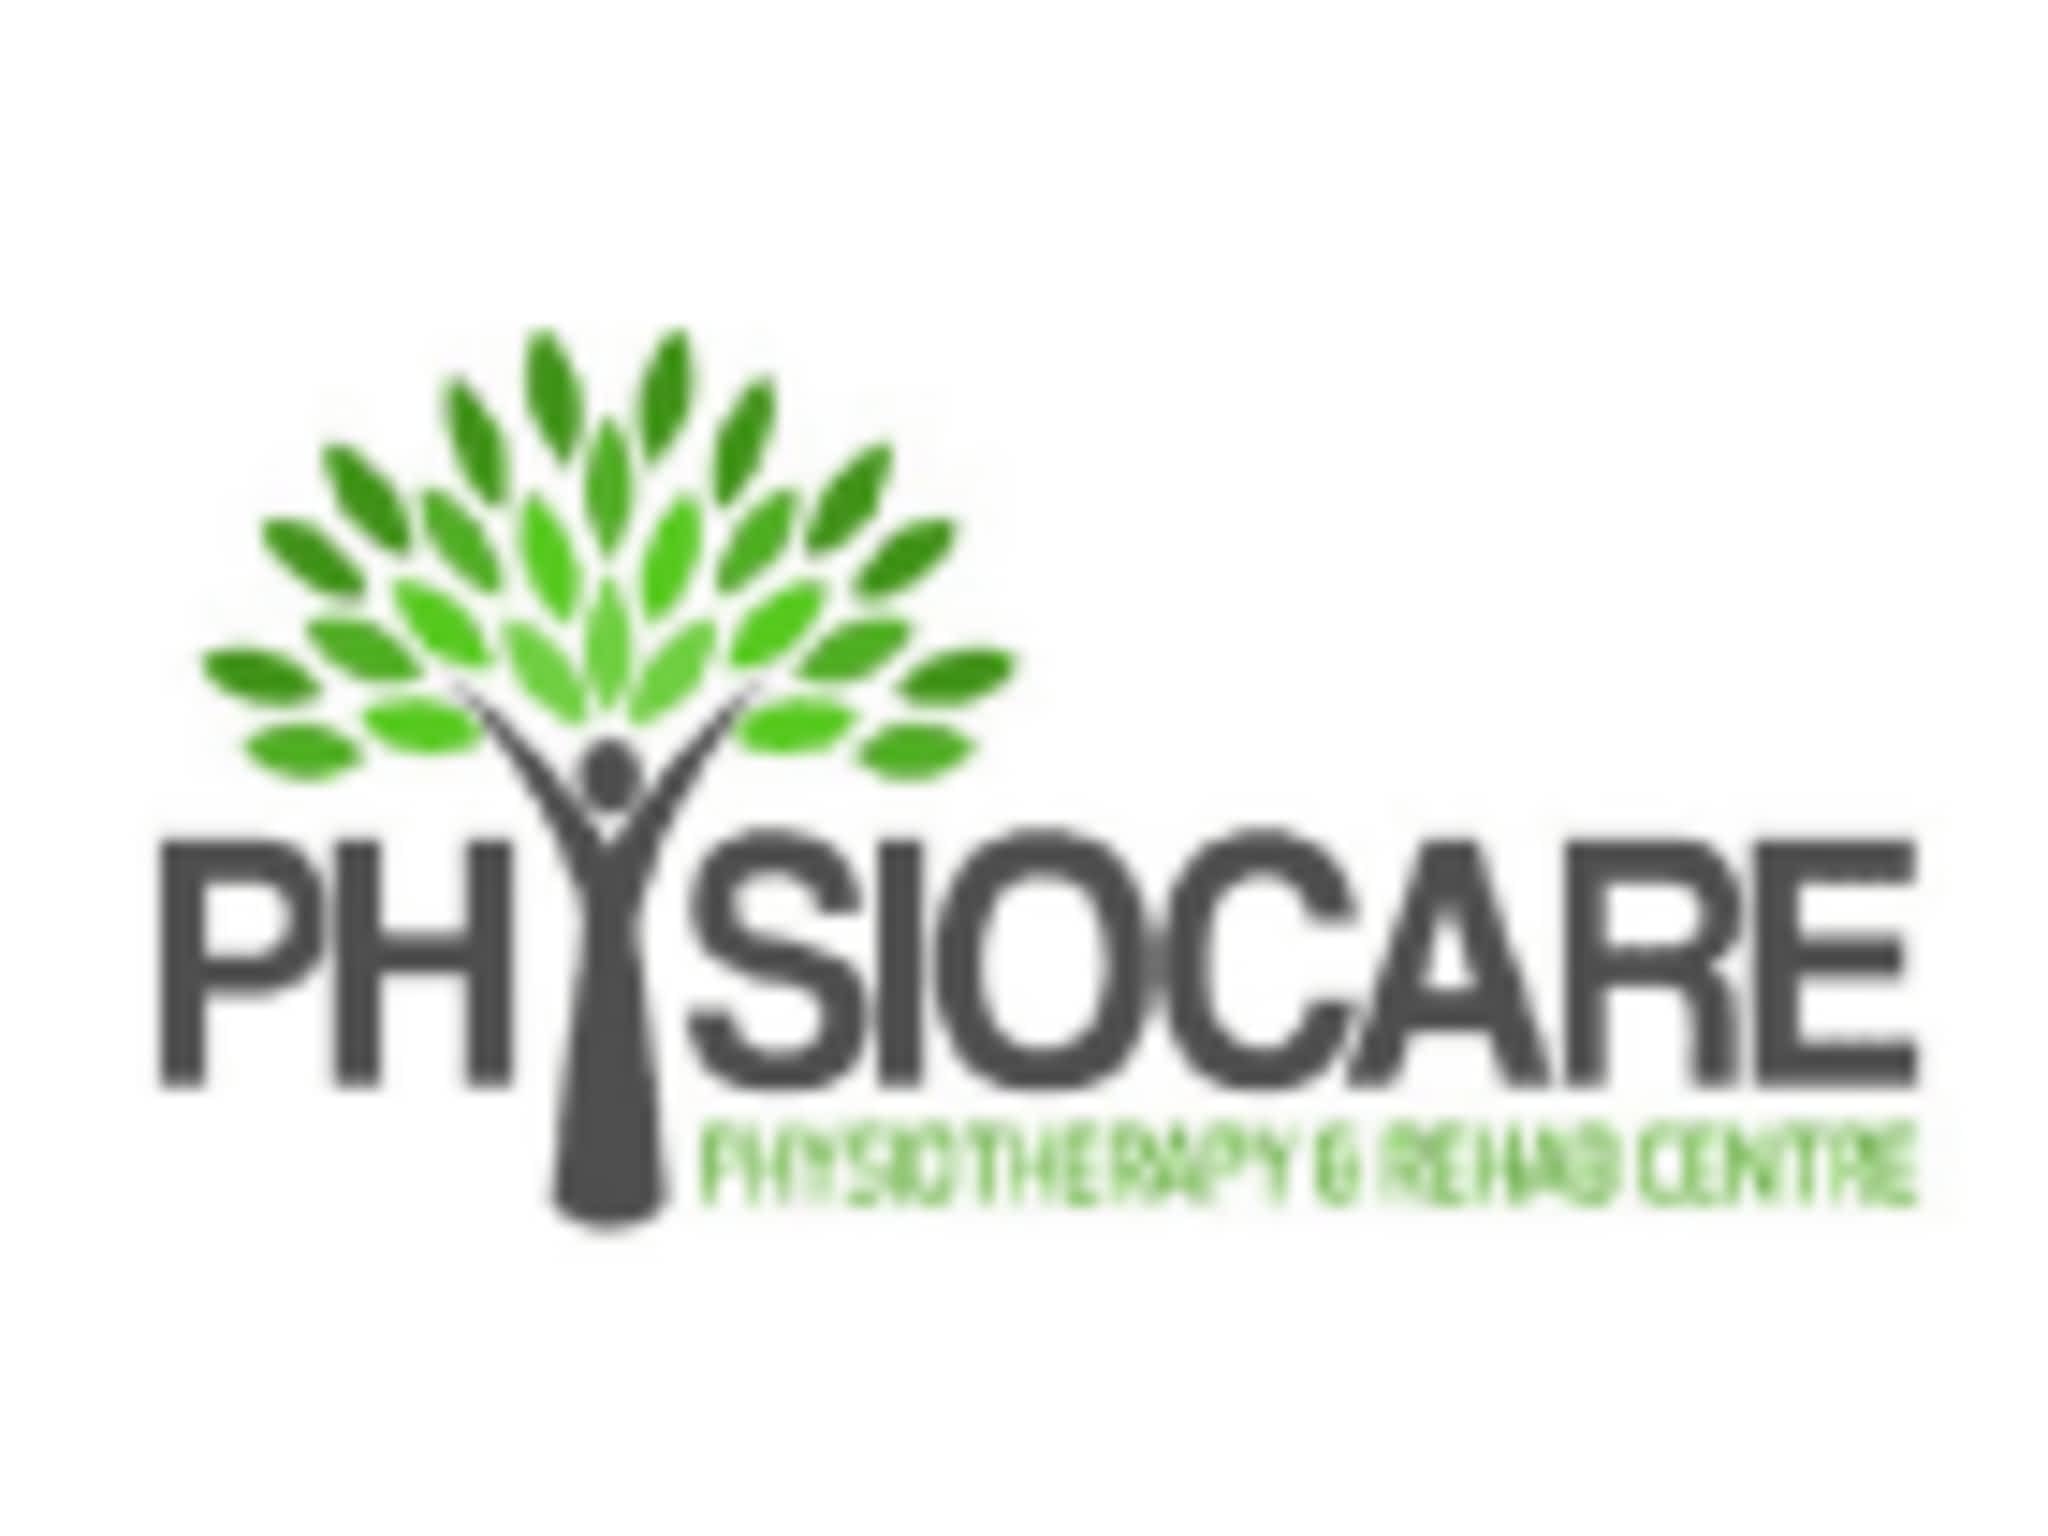 photo Physiocare Physiotherapy & Rehab Centre